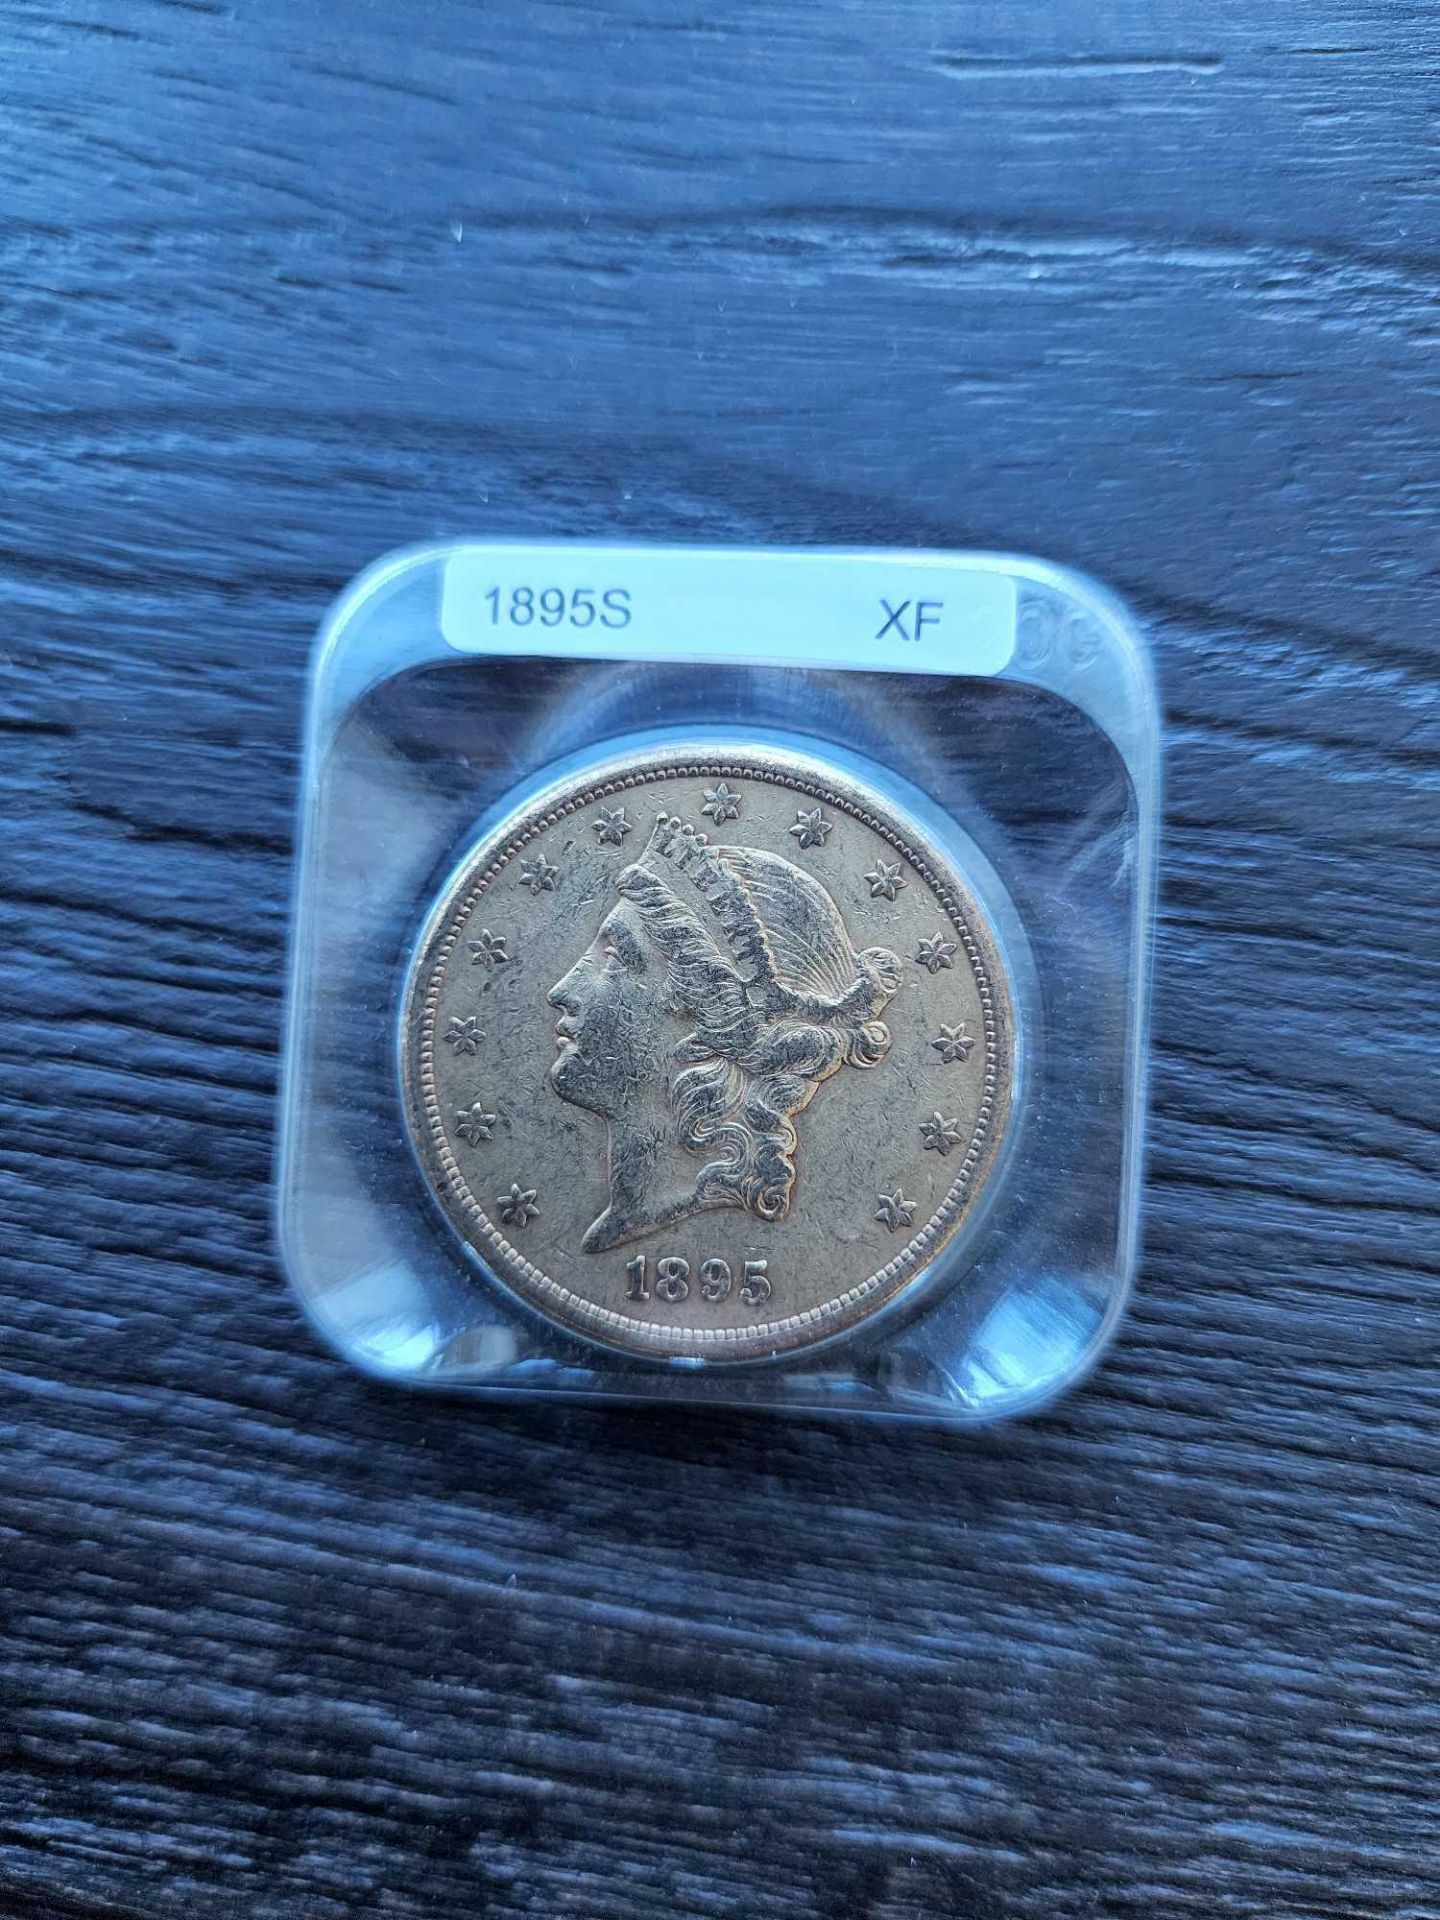 1895 US Liberty Gold Double Eagle $20.00 Gold Coin graded XF